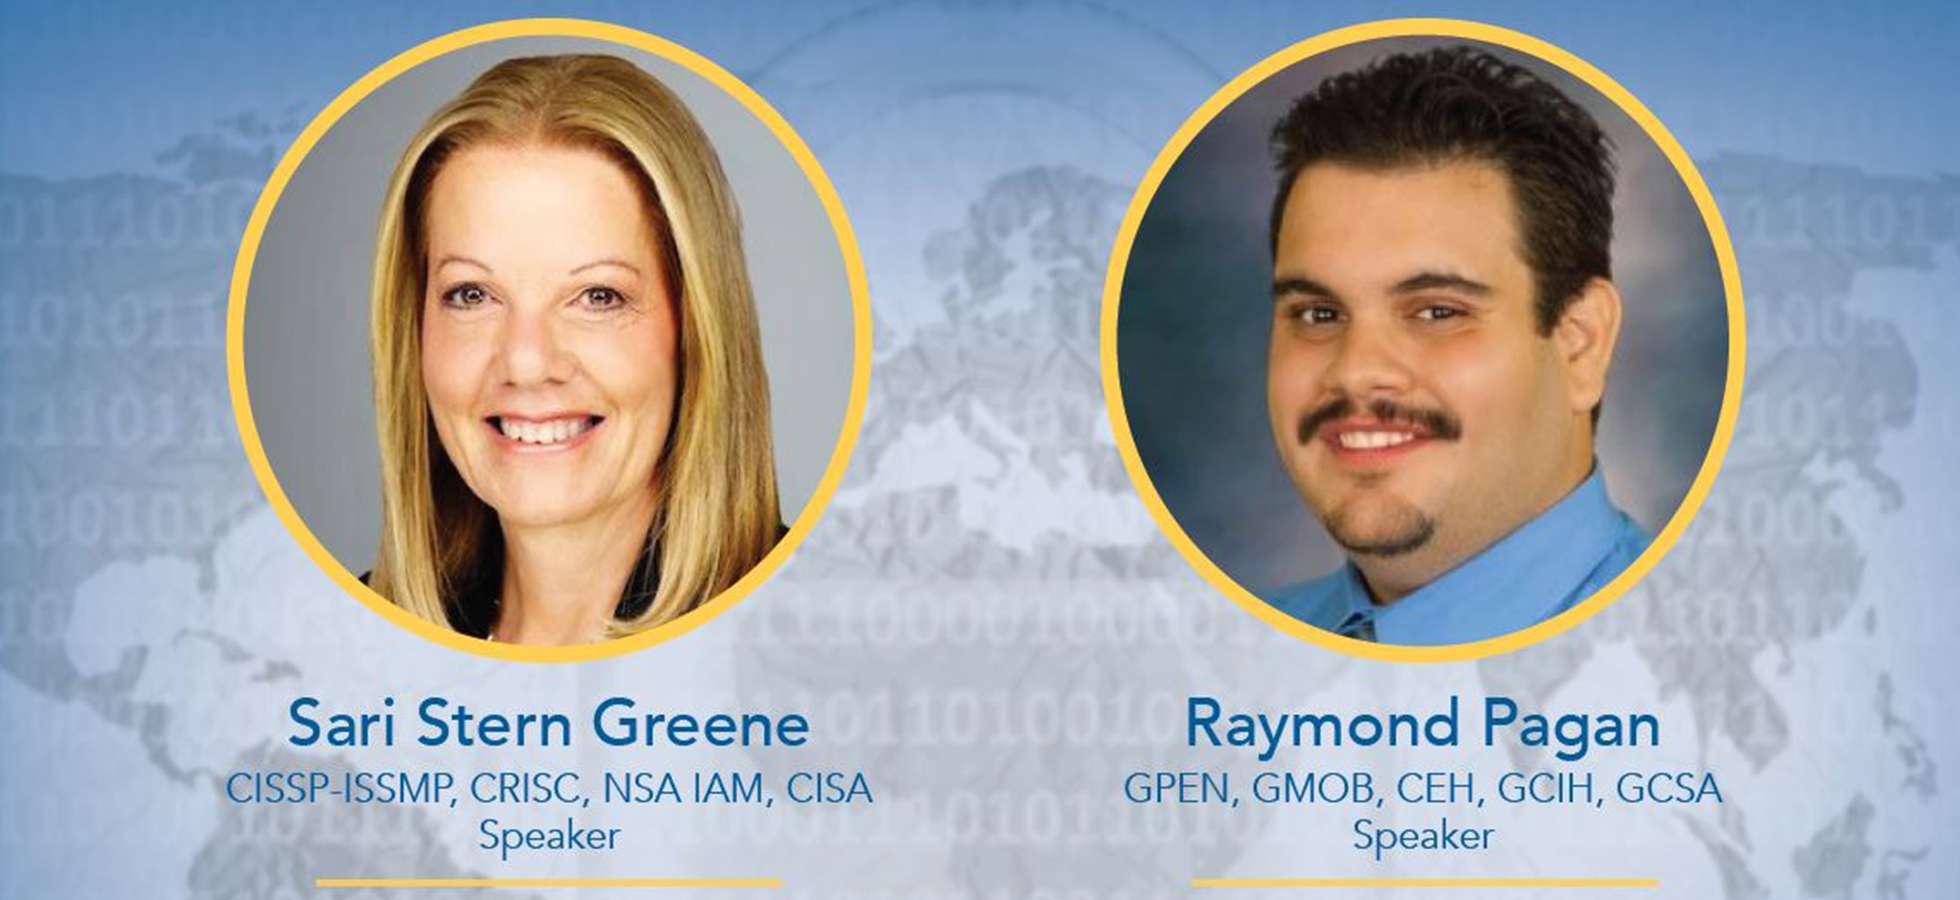 Graphic featuring Sari Stern Greene and Raymond Pagan who will speak at an Assumption University Cybersecurity event.